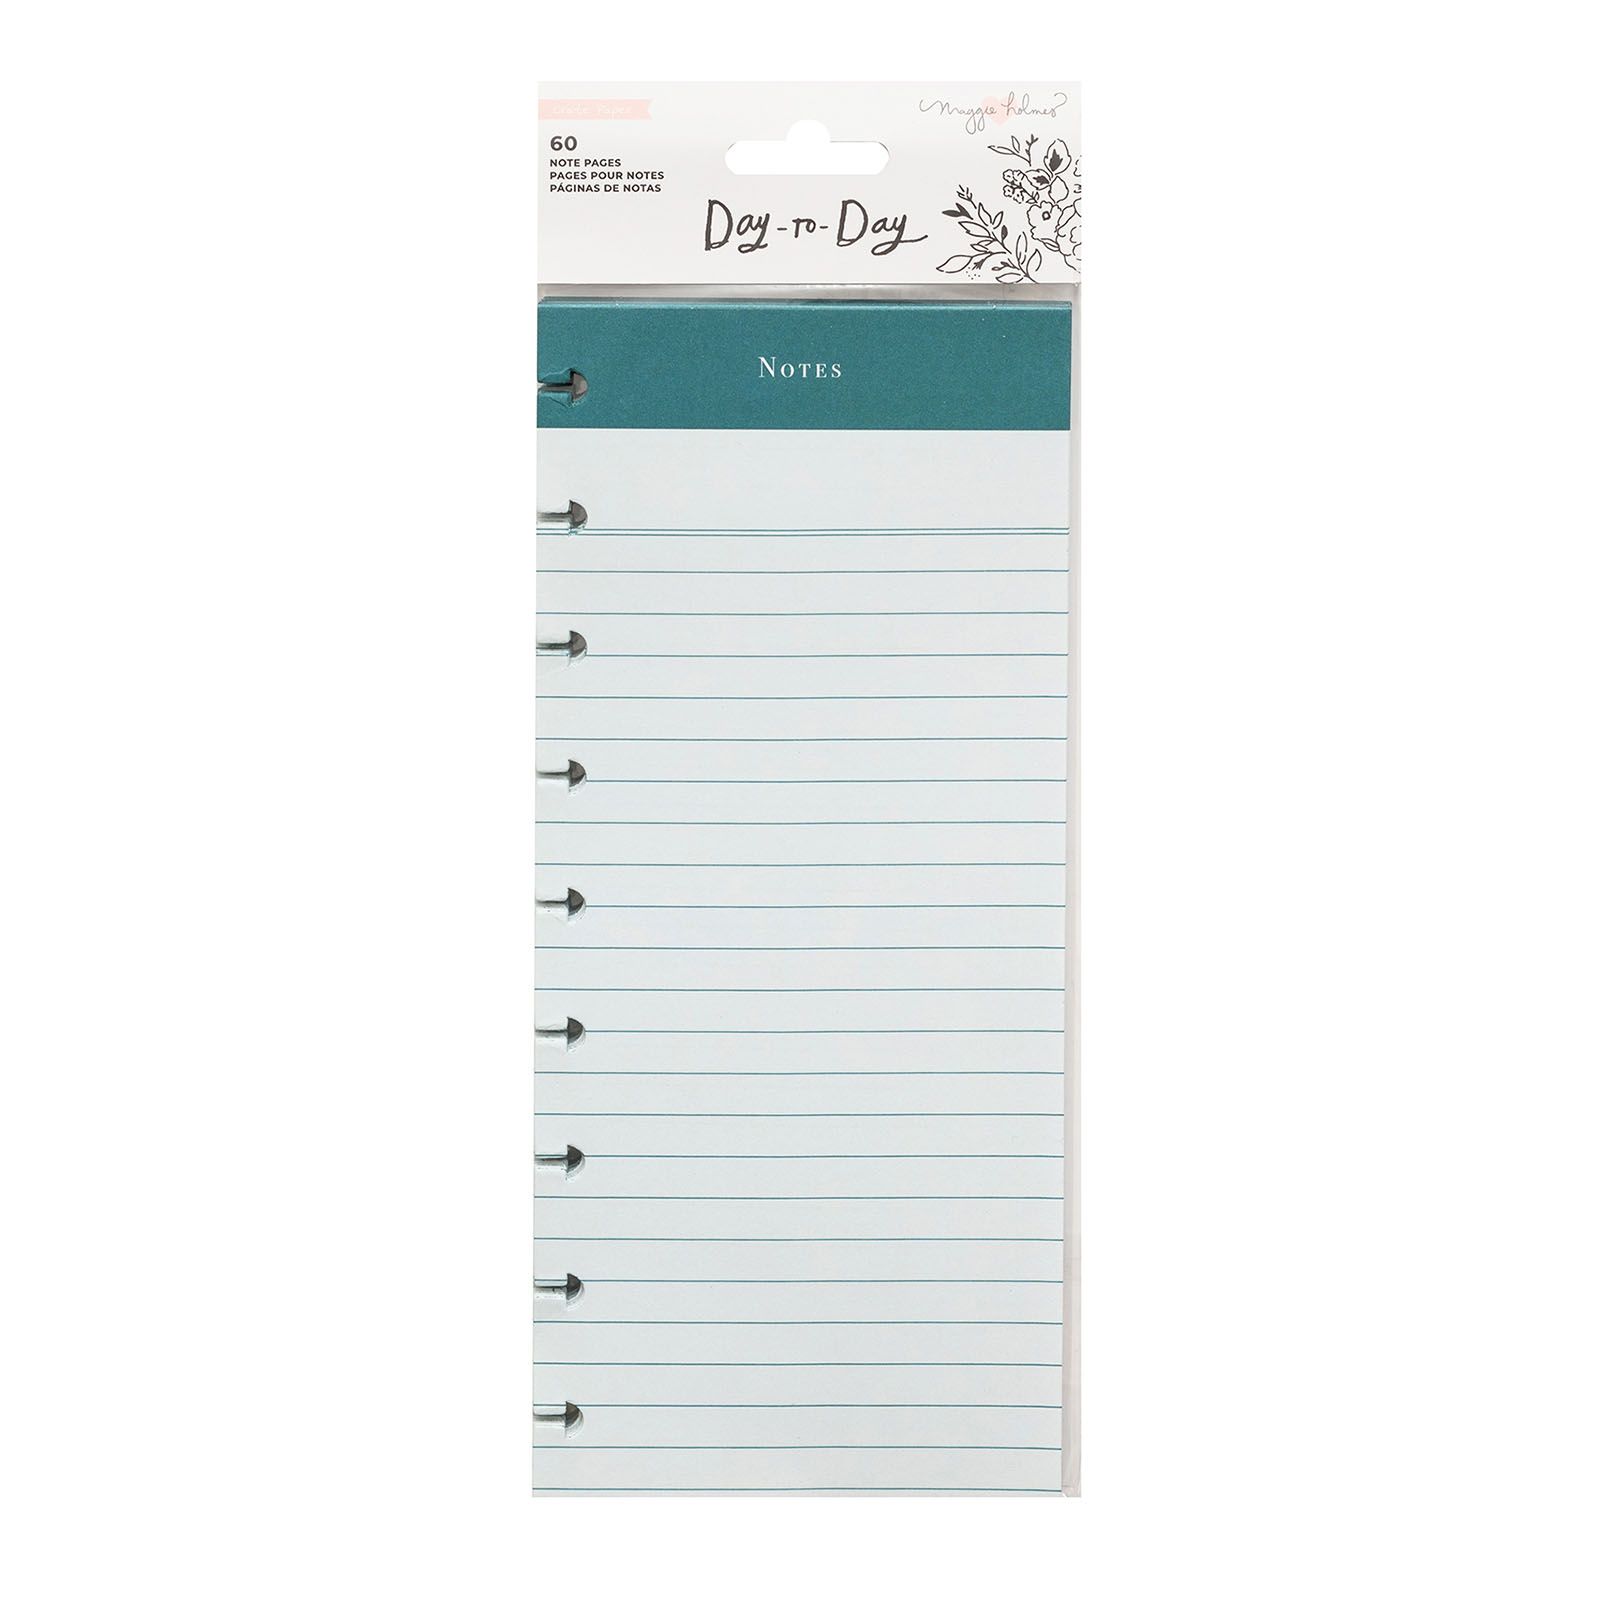 Crate Paper • Day-to-Day disc planner Notes and meal plan